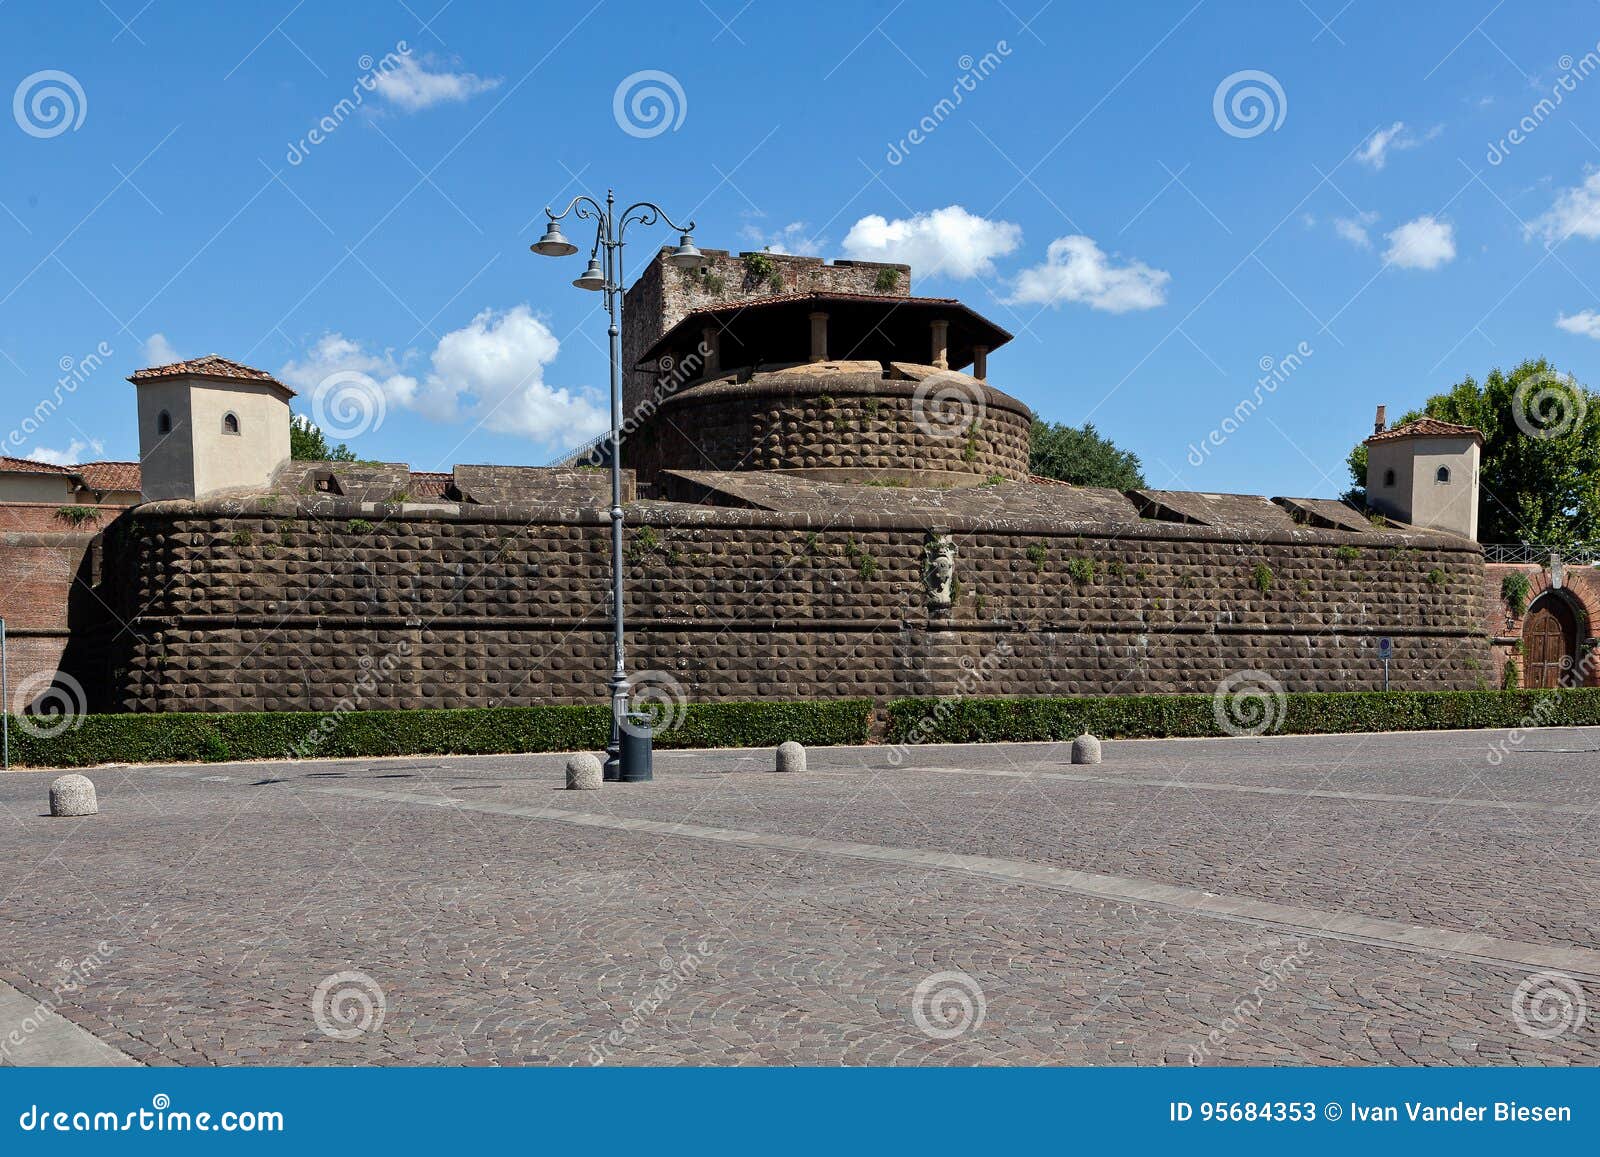 Fortezza Da Basso Fortress Florence, Italy Stock Image - Image of ...